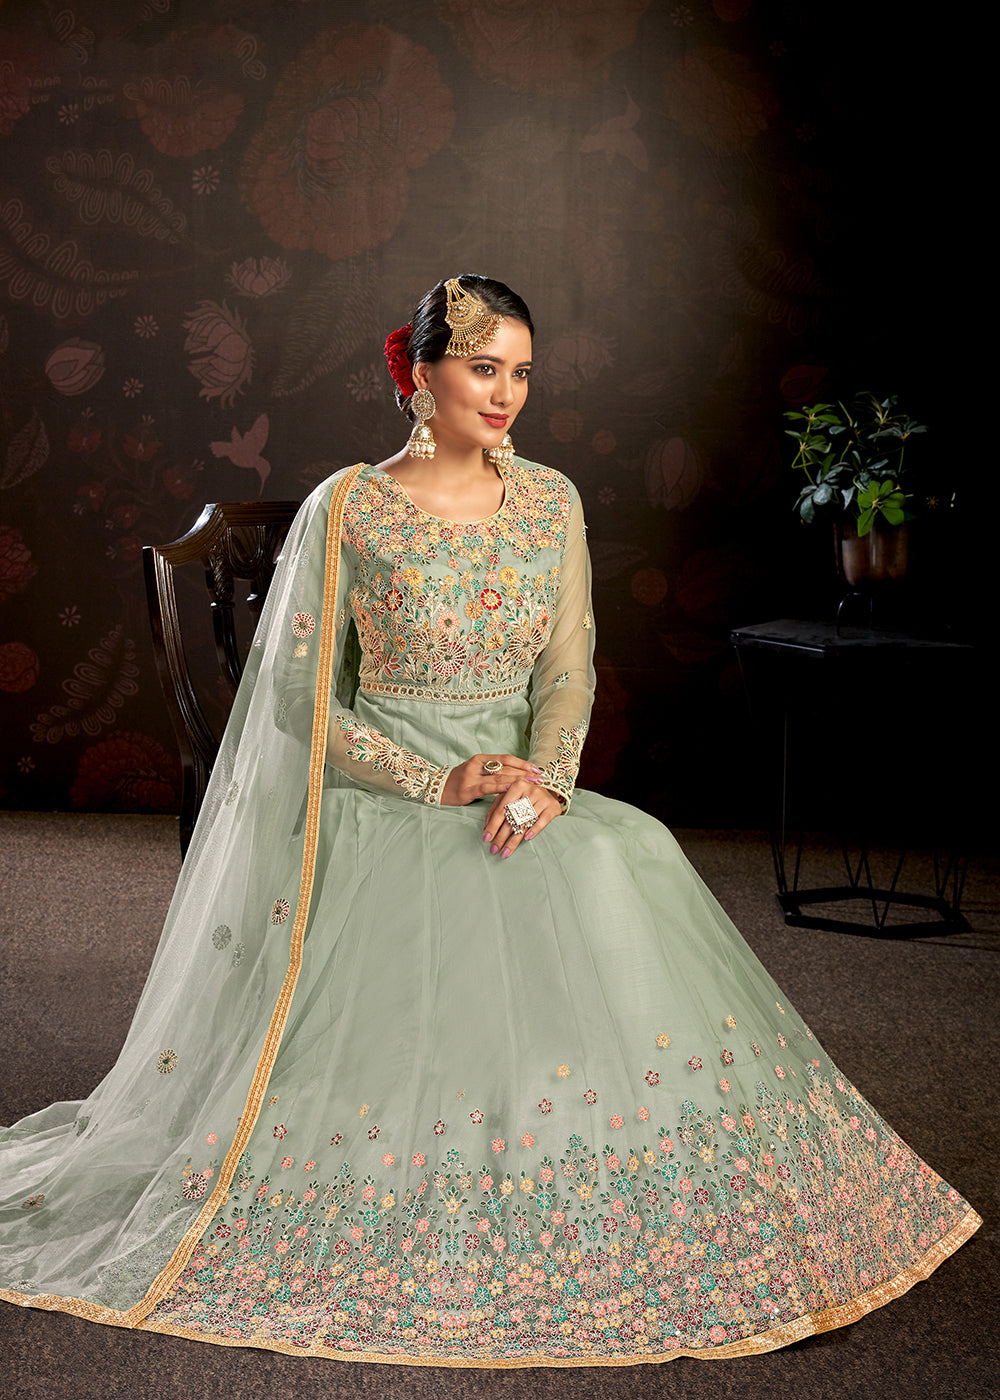 Buy Now Mint Green Sparkly Net Embroidered Designer Anarkali Suit Online in USA, UK, Australia, New Zealand, Canada & Worldwide at Empress Clothing.